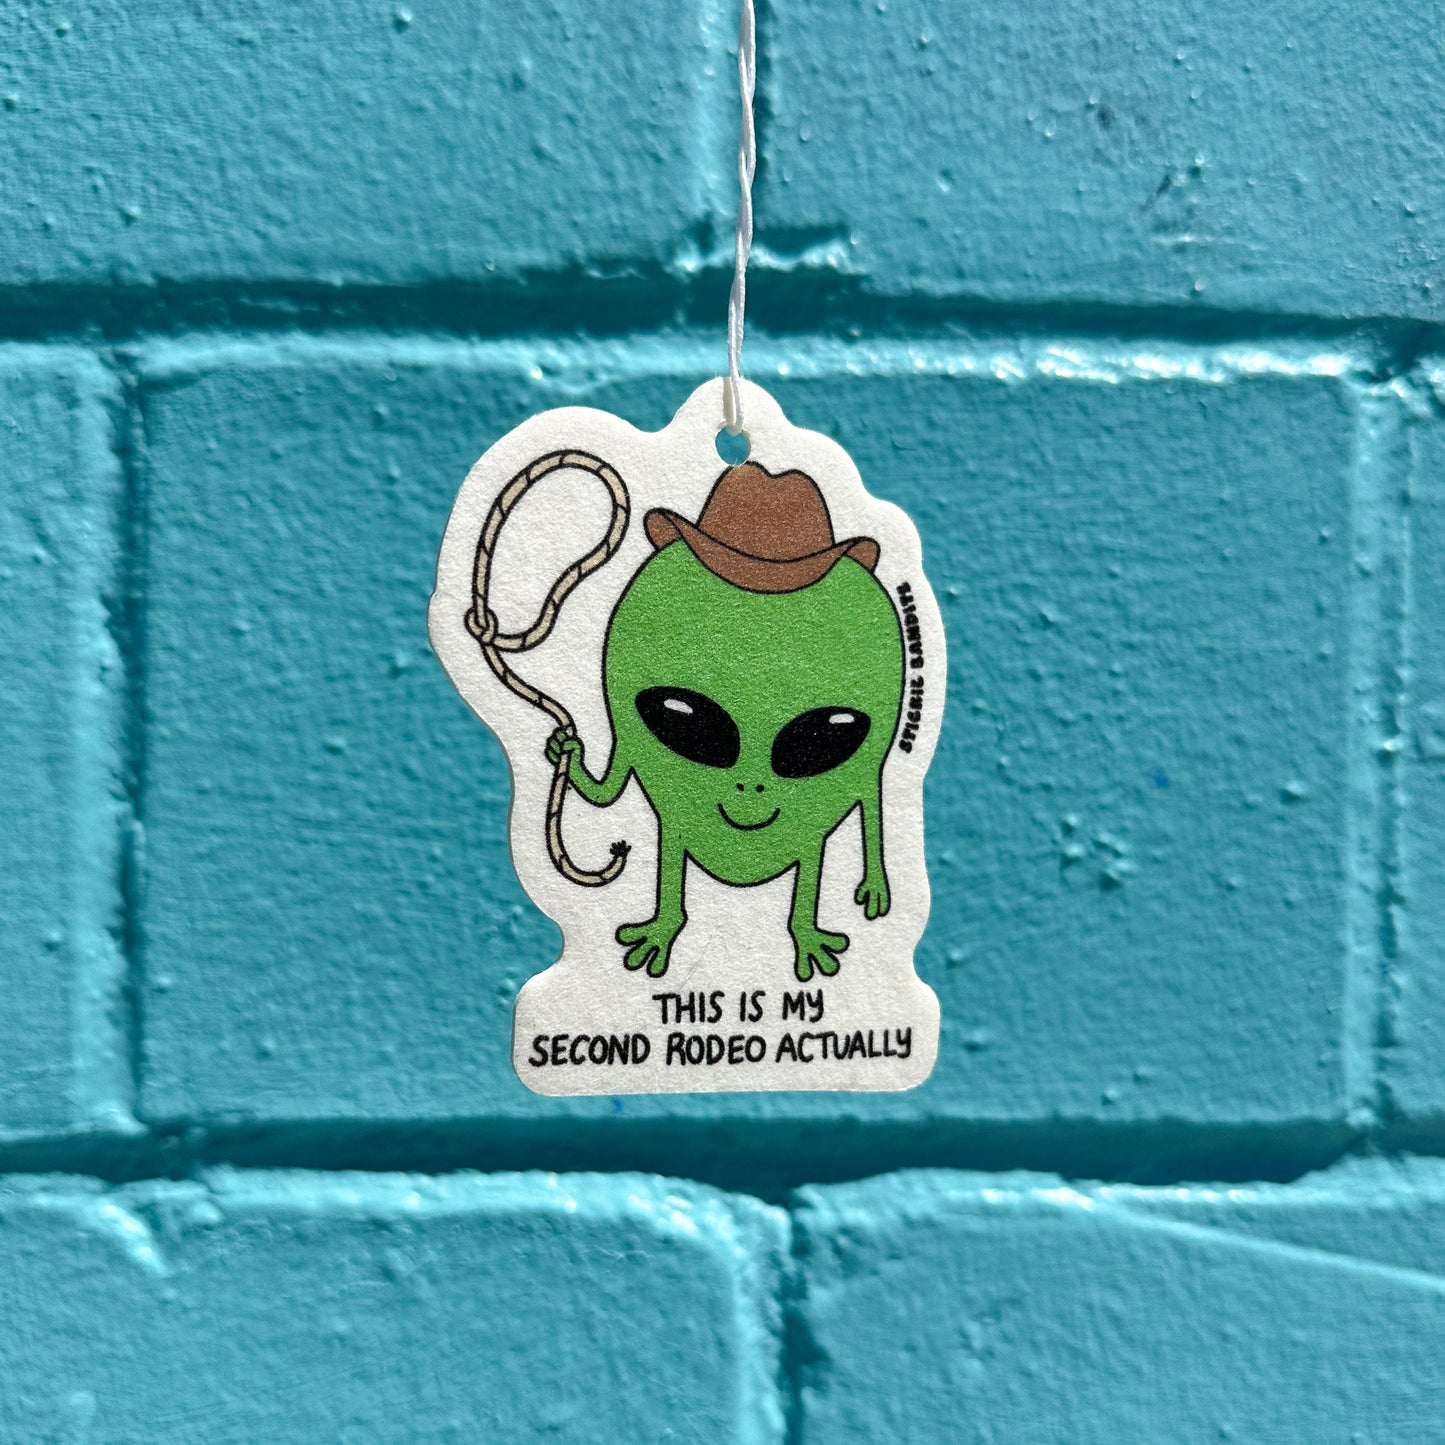 Second Rodeo Air Freshener